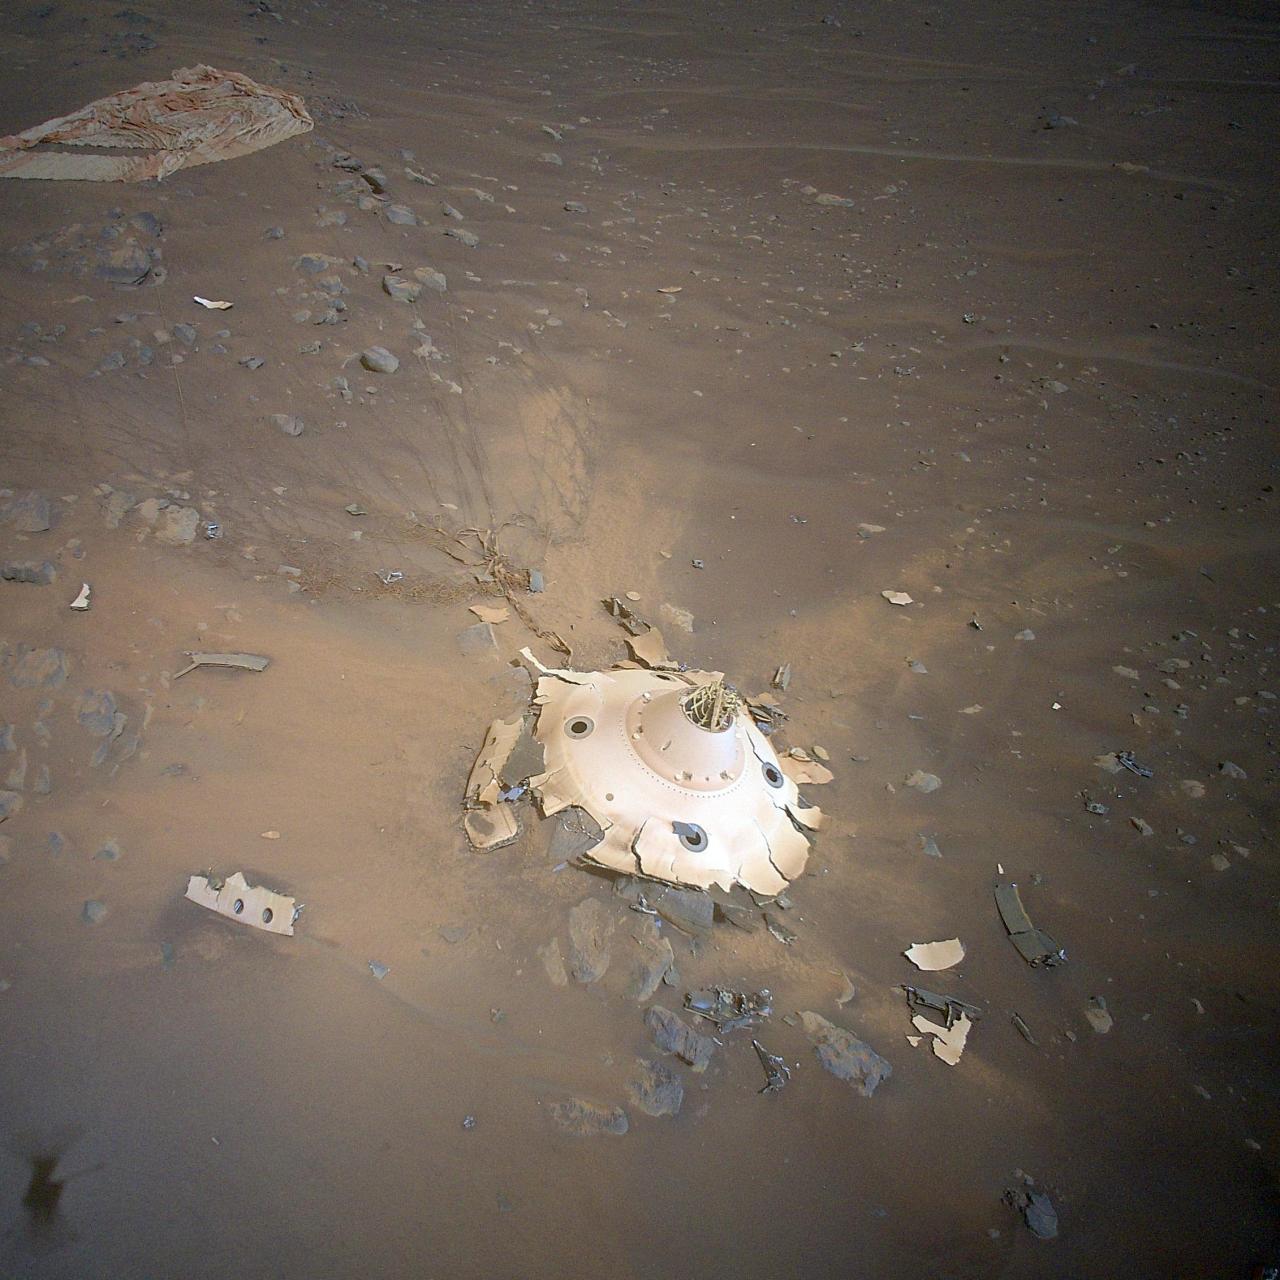 NASA Images of Space Debris on Mars Discovery